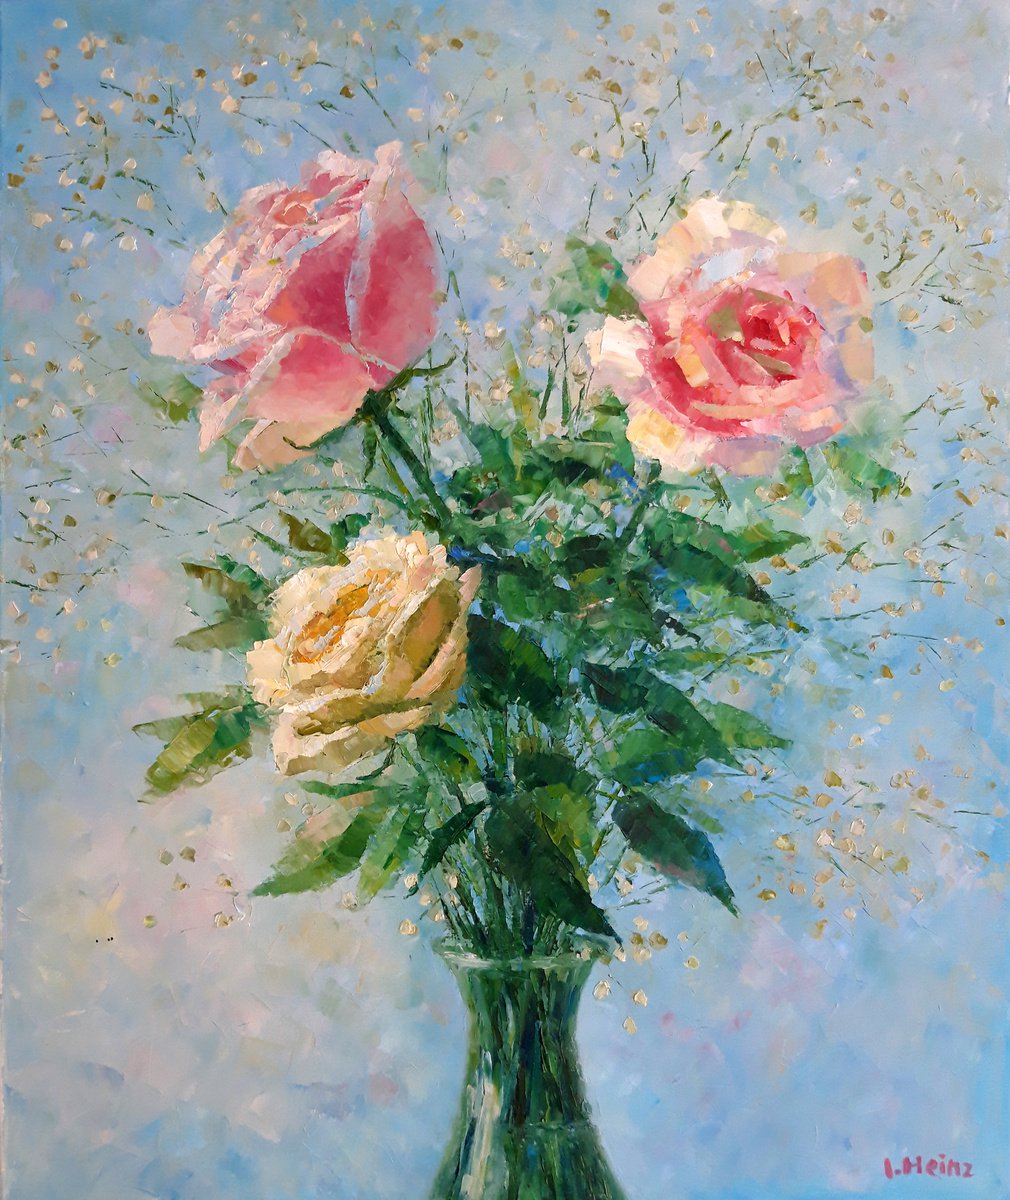 Refined roses by Irena Heinz